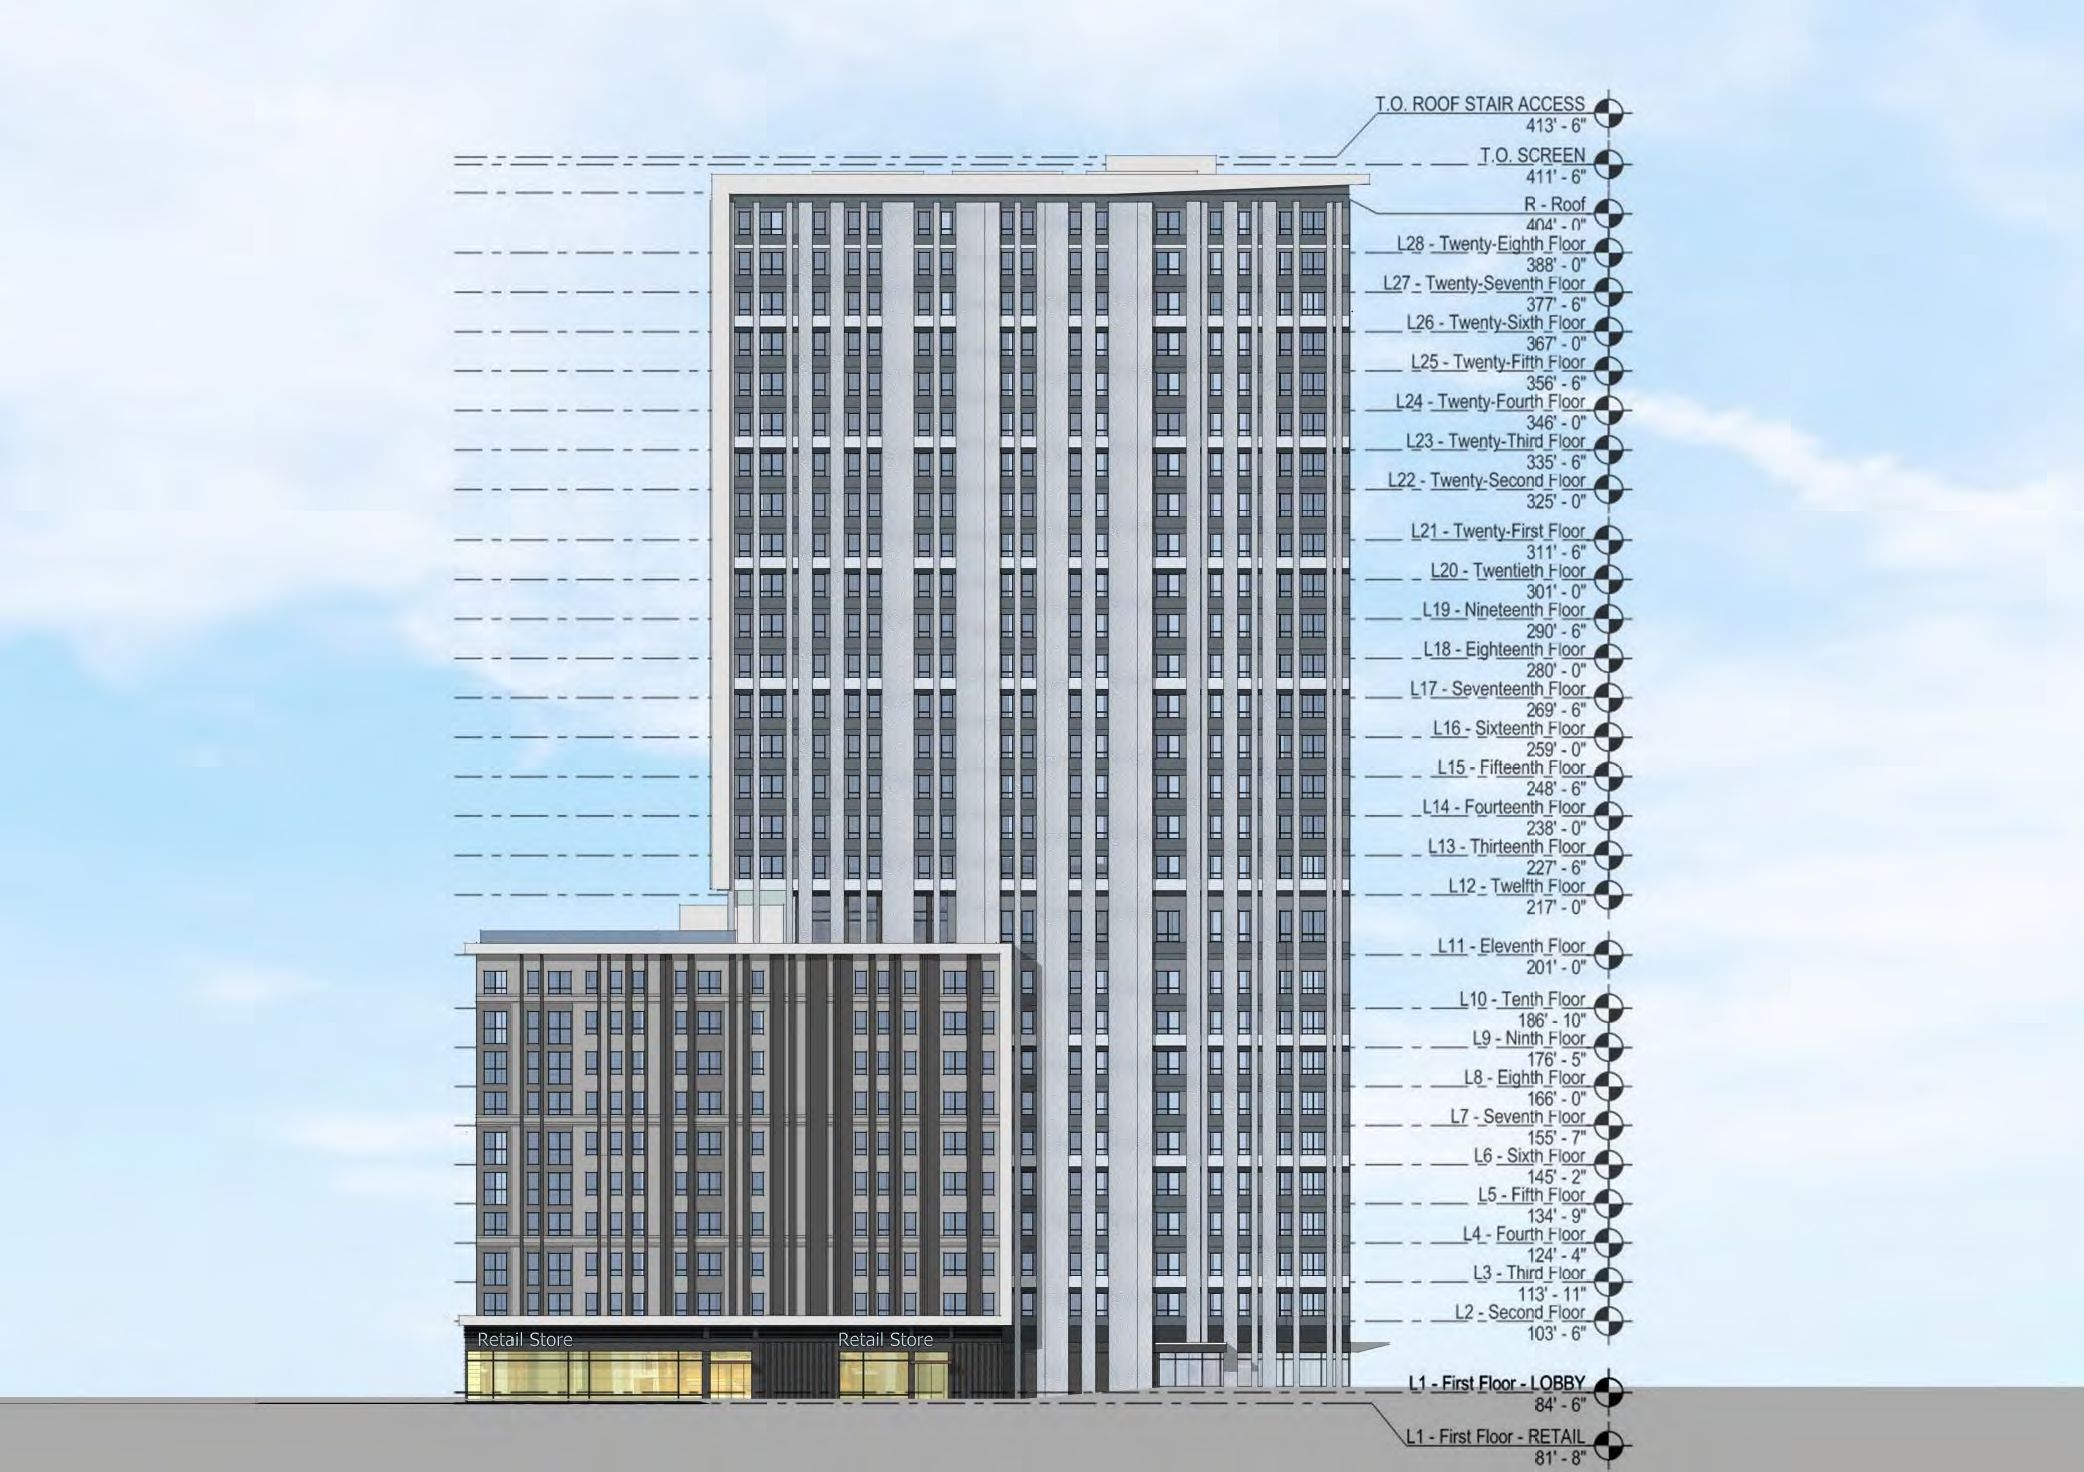 Legacy on Broad at 1518-28 North Broad Street. Building elevation. Credit: CUBE 3 Studio LLC via the Civic Design Review